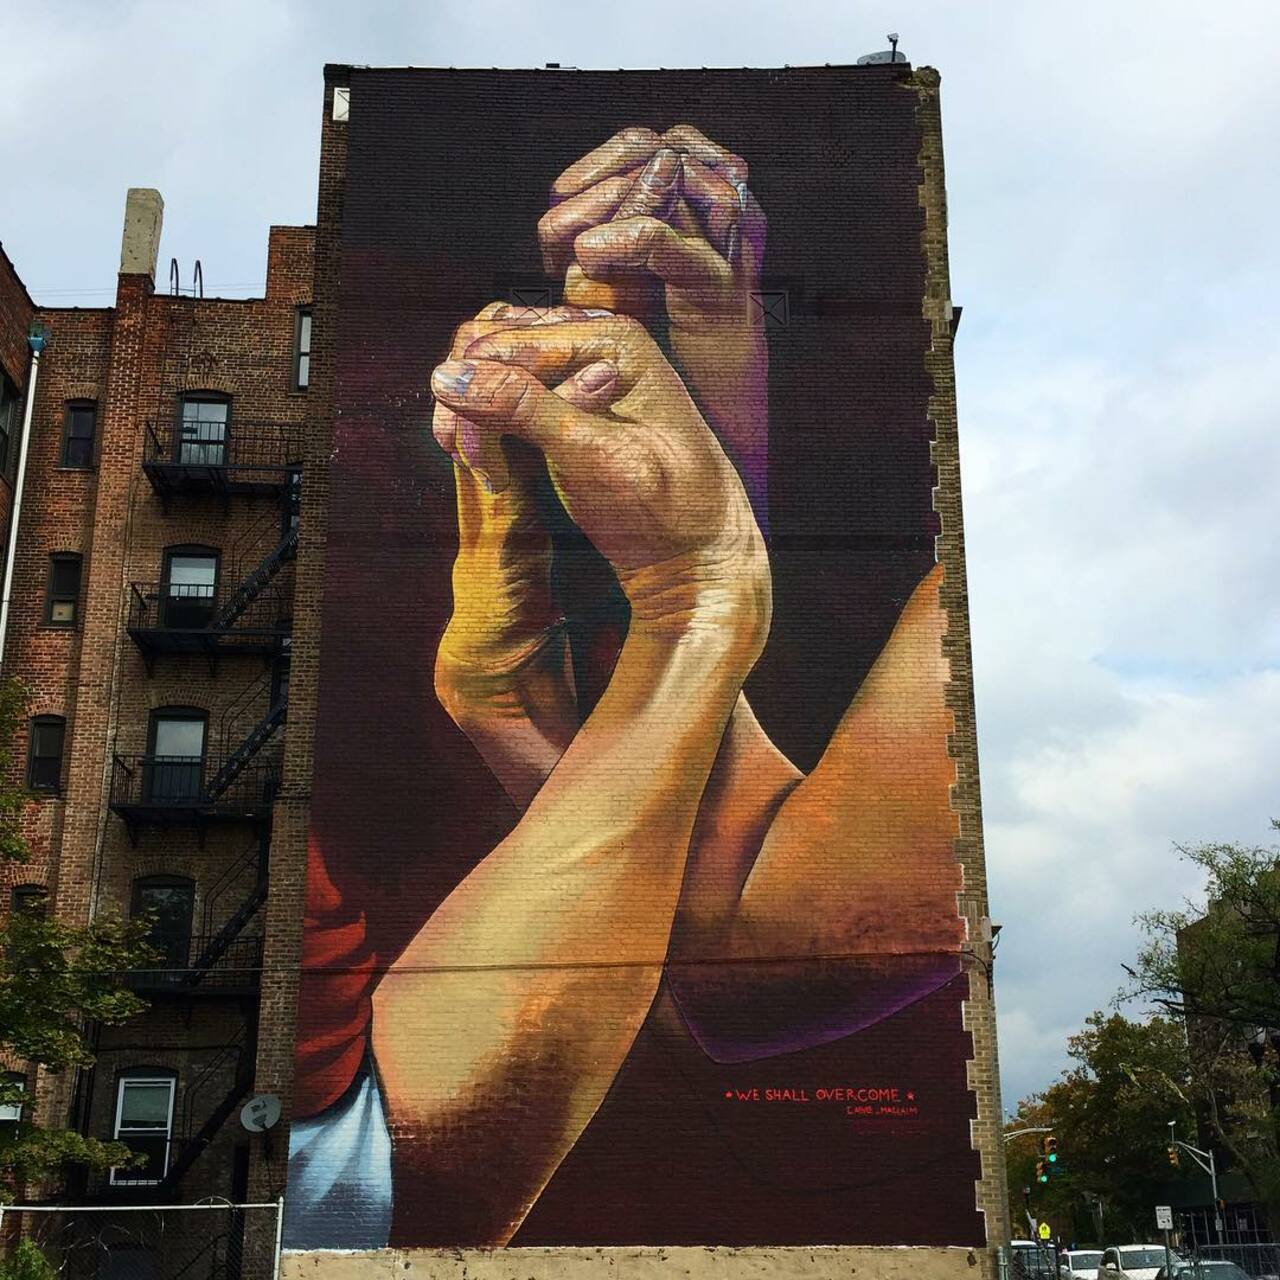 'We Shall Overcome' a new mural from Case Ma'Claim in Jersey City for The Bushwick Collective. #StreetArt #Graffiti http://t.co/SK03CCDAUQ